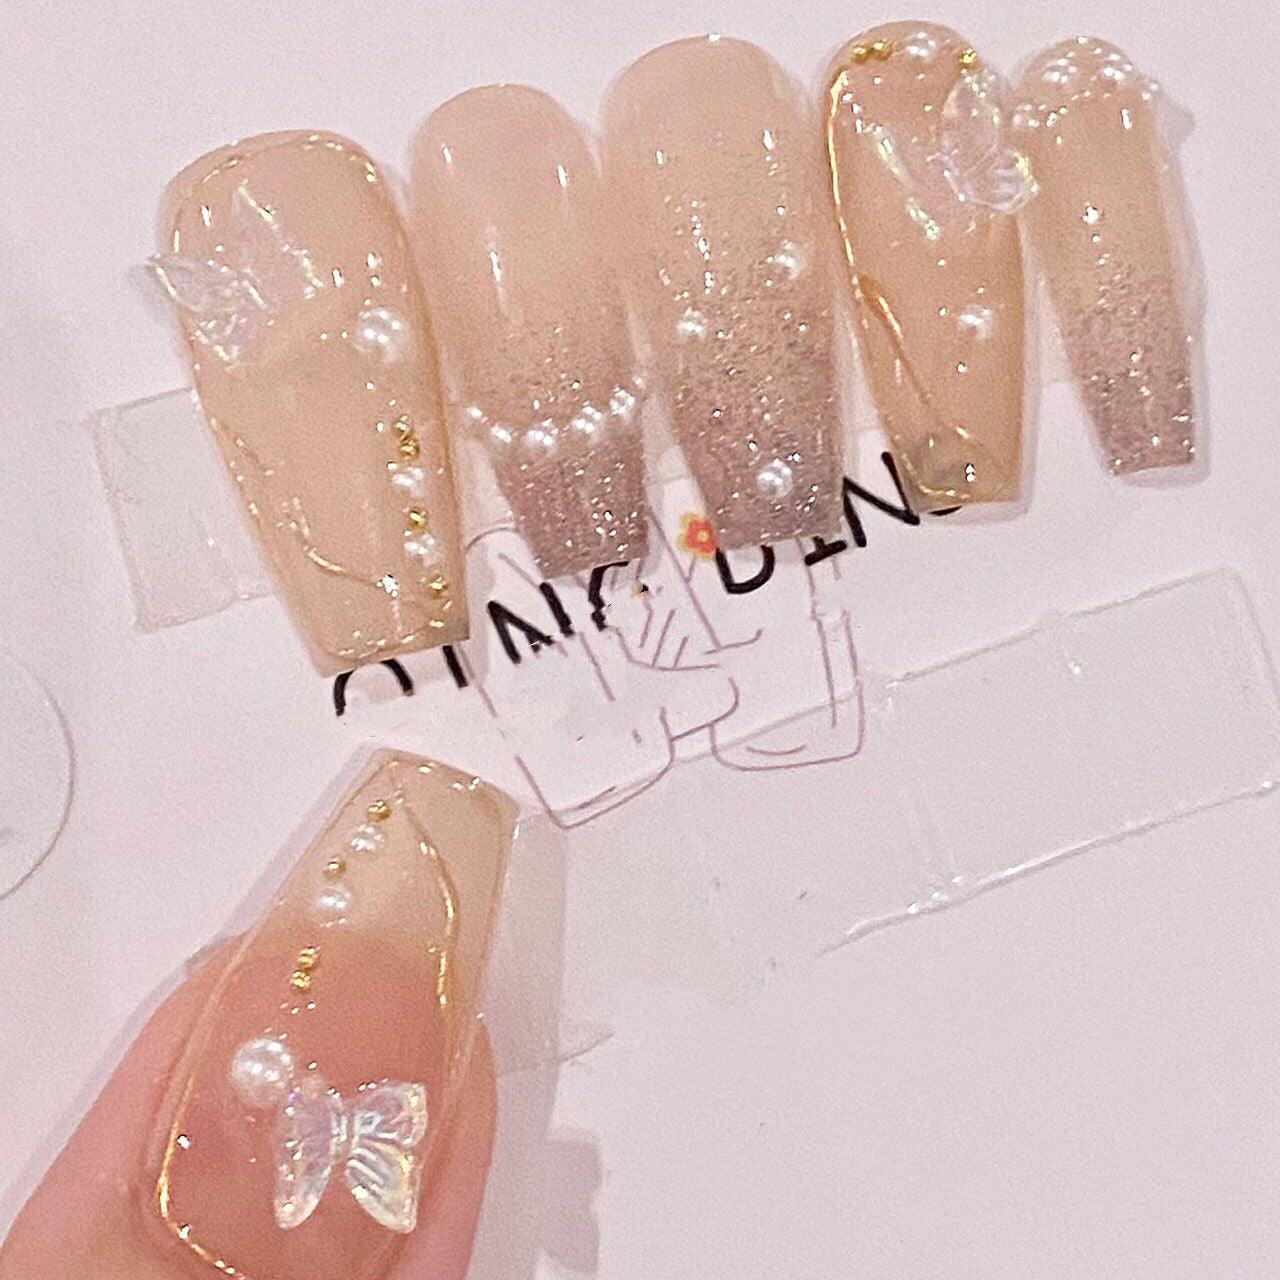 Pearl Butterfly | False Nails | Chip-resistant nails, Customizable nails, Diamond butterfly, Elegant nails, Handmade false nails, Nail art design, Removable false nails, Show white pearl, Special occasion nails, Whimsical nails. | SHOPQAQ